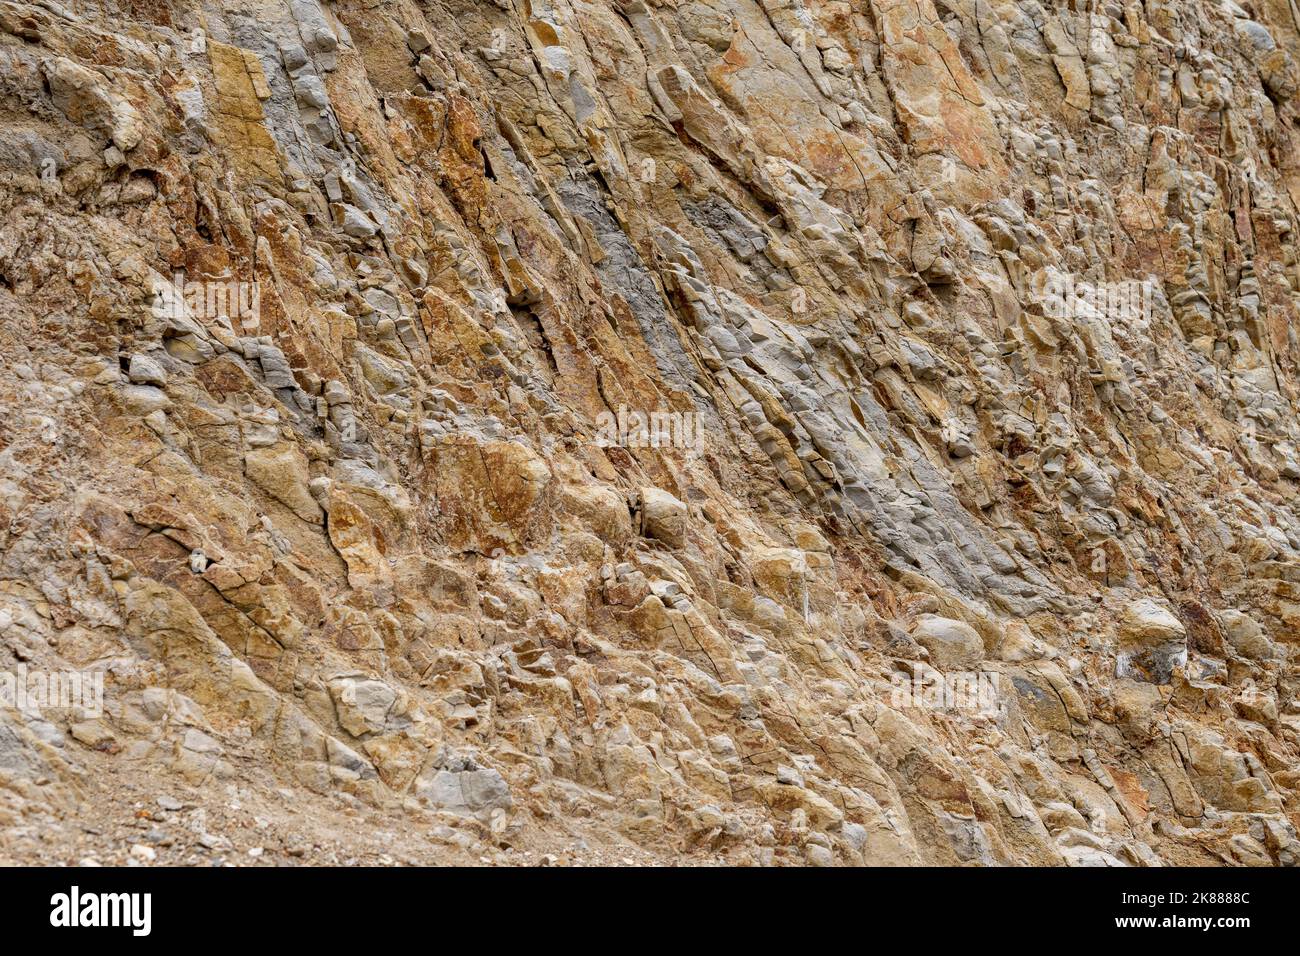 Closeup on Franciscan complex in the Marin Headlands - geology background or backdrop Stock Photo